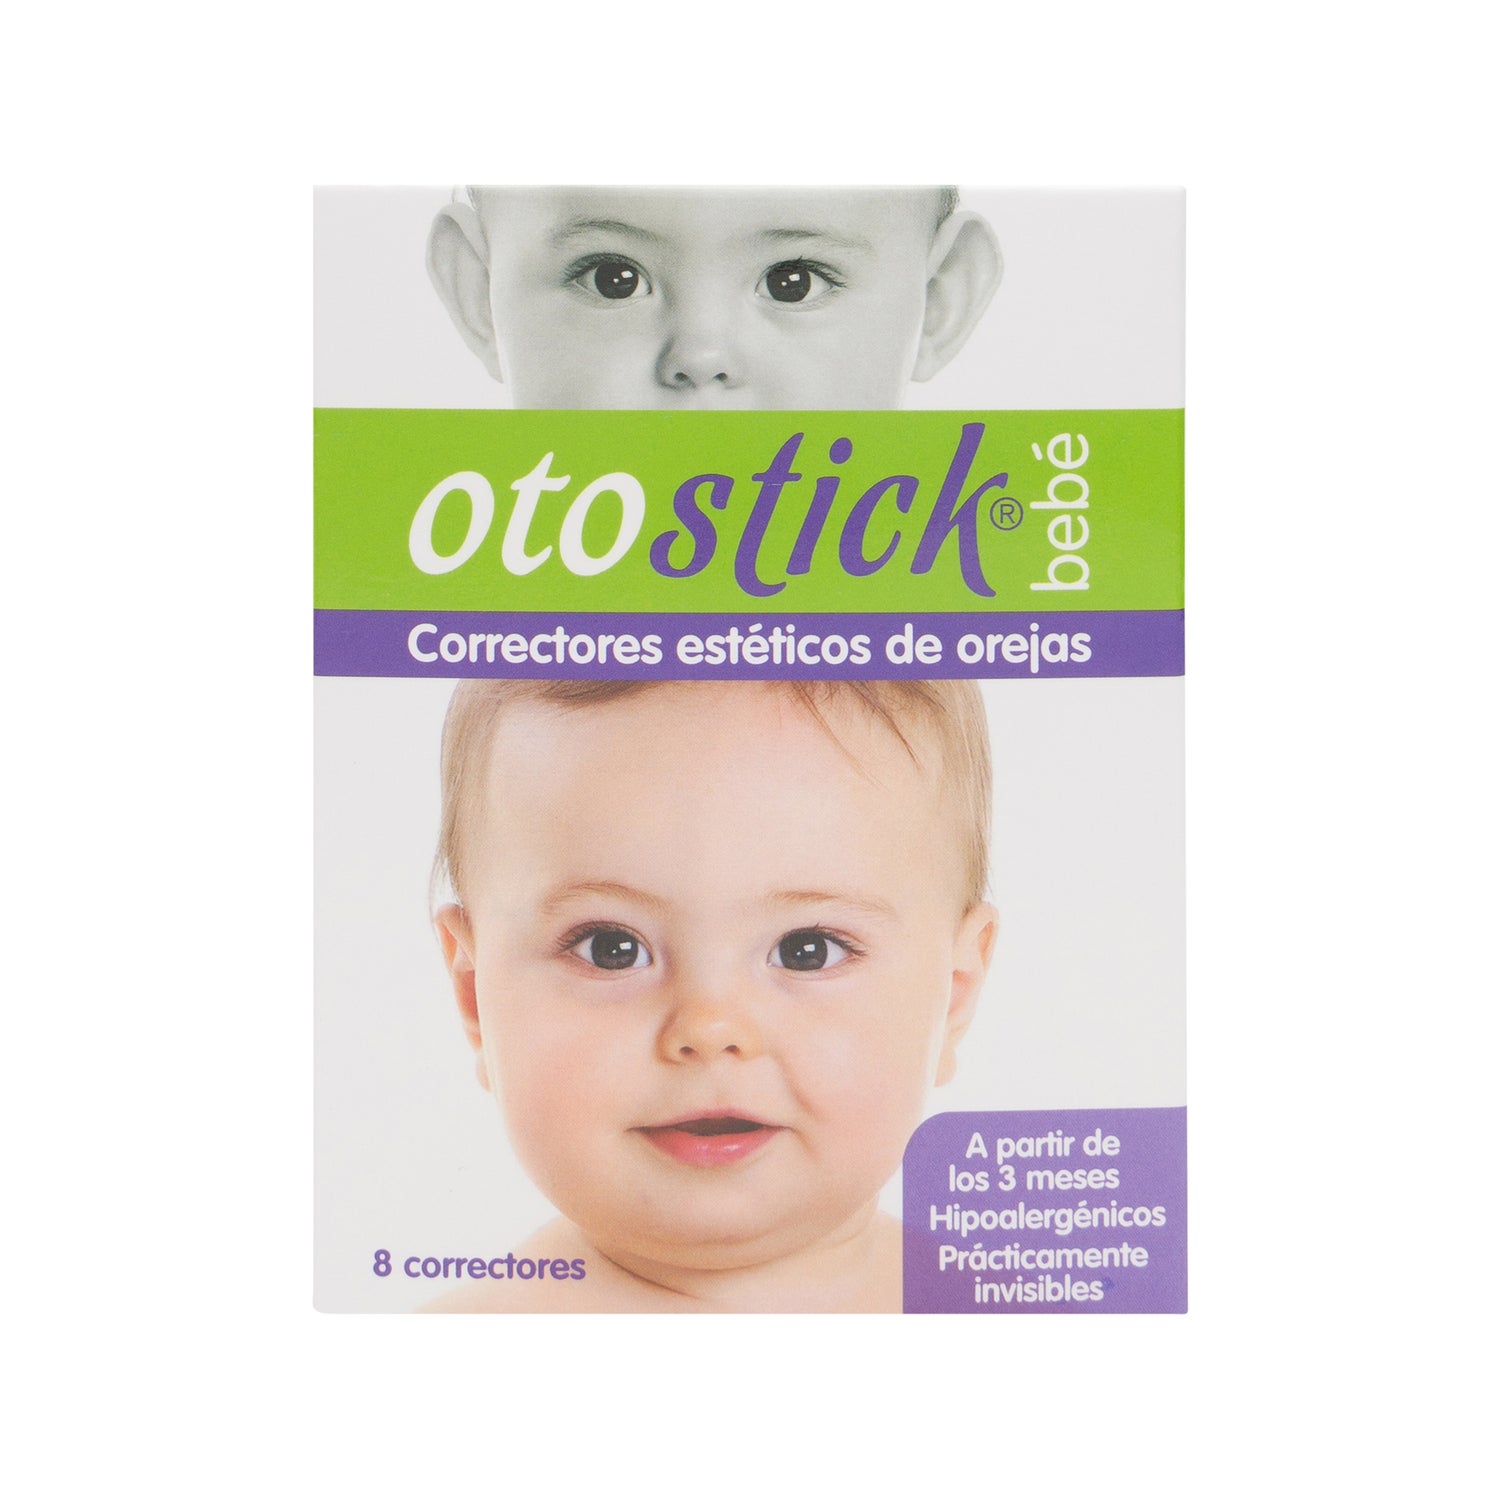 otostick - Do you know how to easily remove Otostick from